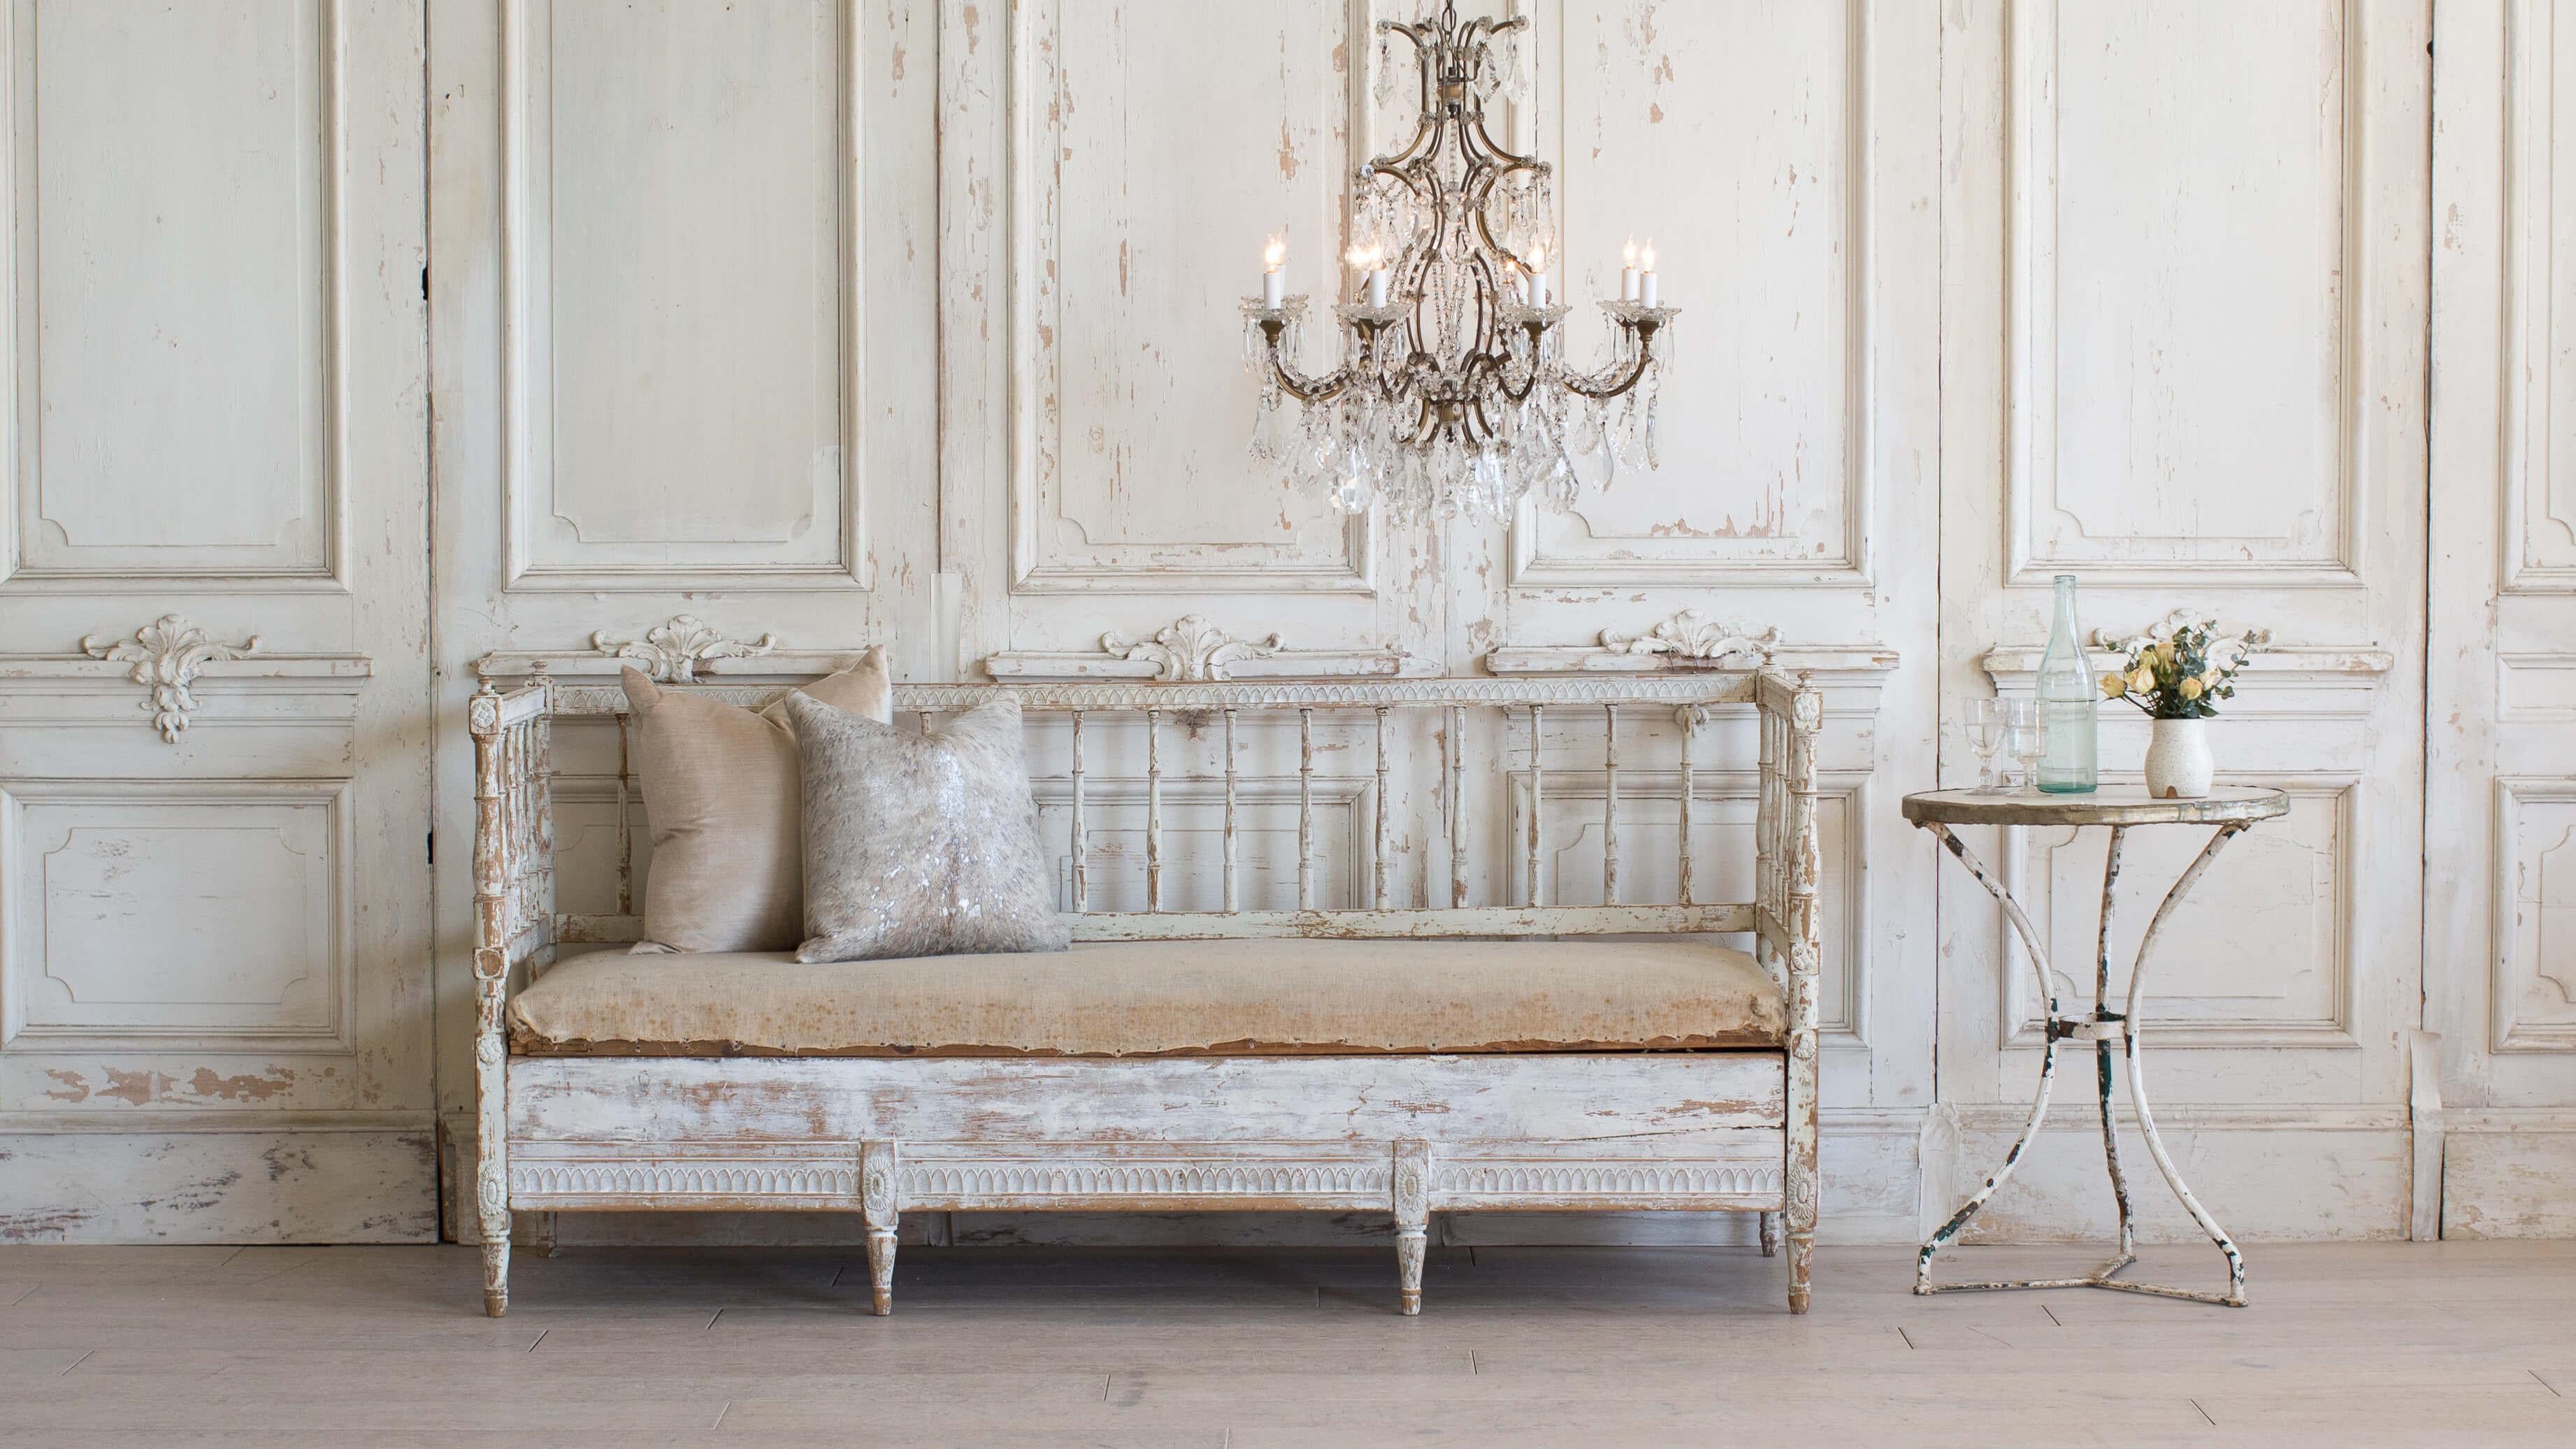 Divine antique Swedish daybed with stunning hand carvings and original muslin seat cushion. Spindle backing and hidden drawer that pulls out for storage or a trundle. Beautiful patina finish with tones of whites and pale green with slight